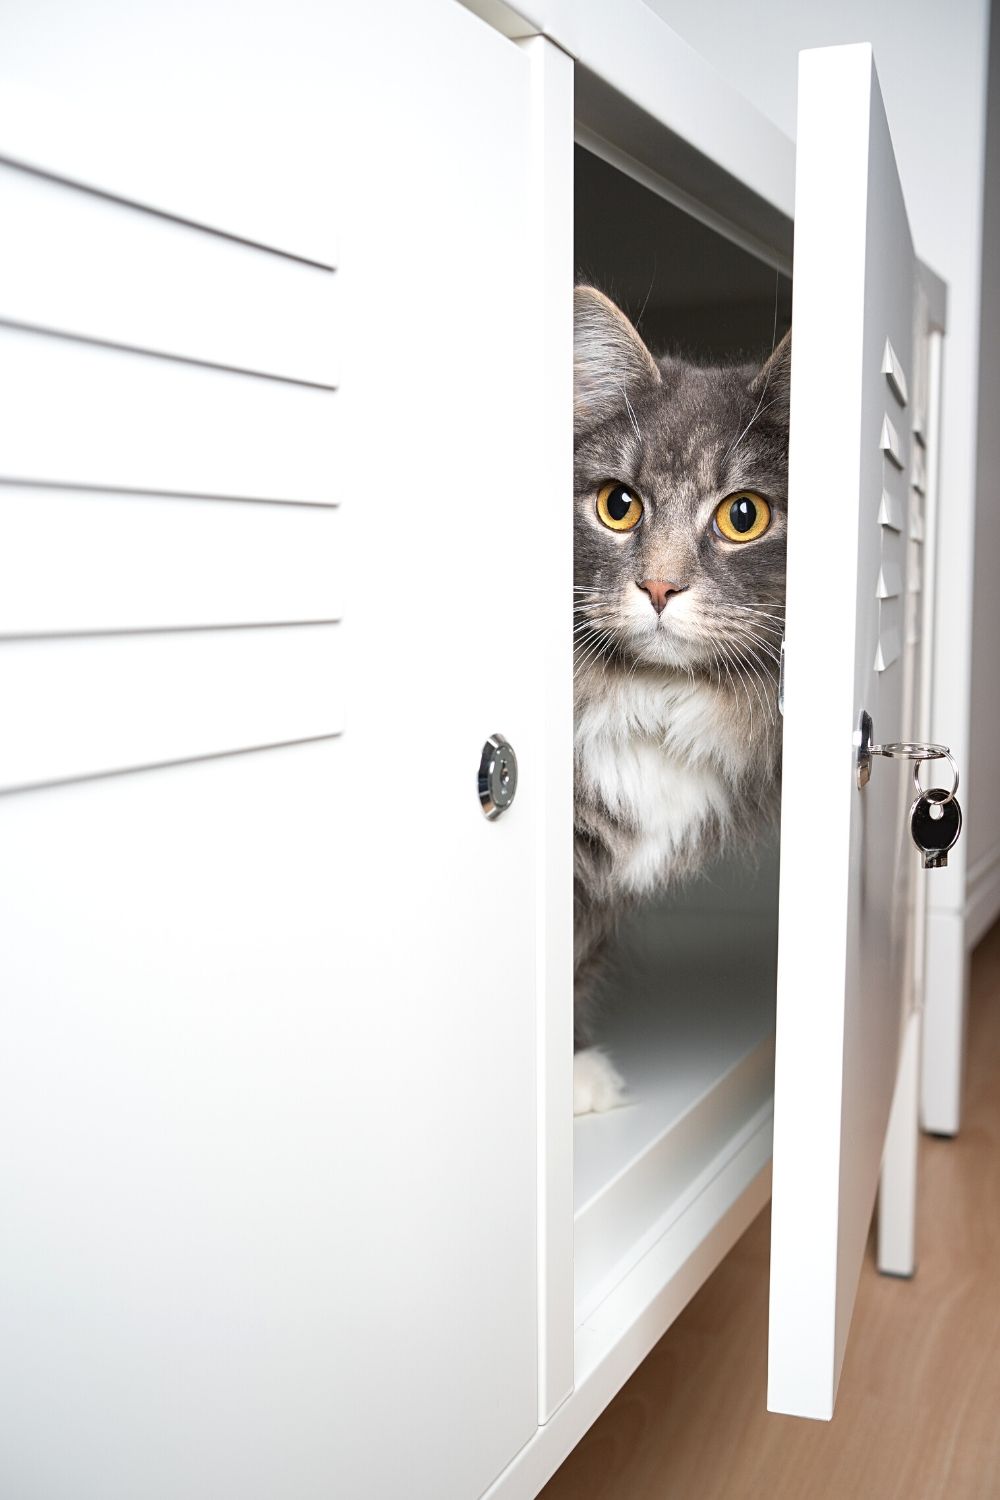 Some cats, instead of burying their leftovers, find small spaces like cupboards to hide them